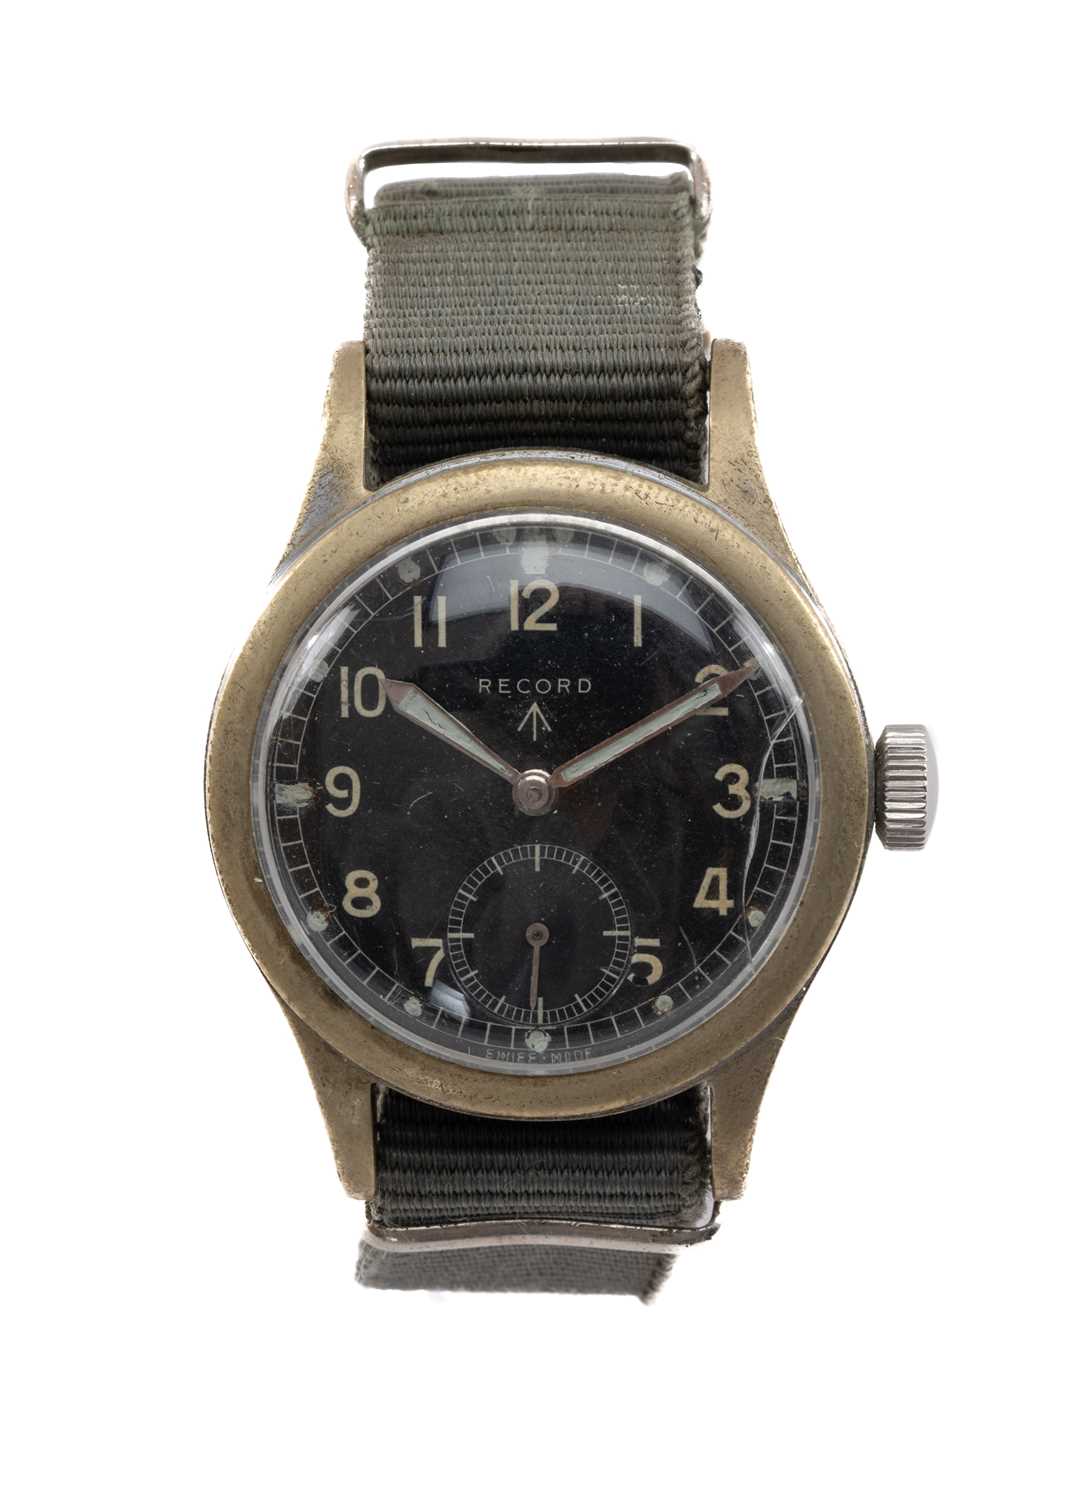 RECORD WORLD WAR II MILITARY WRISTWATCH, one of the famous 'Dirty Dozen' collection, the black